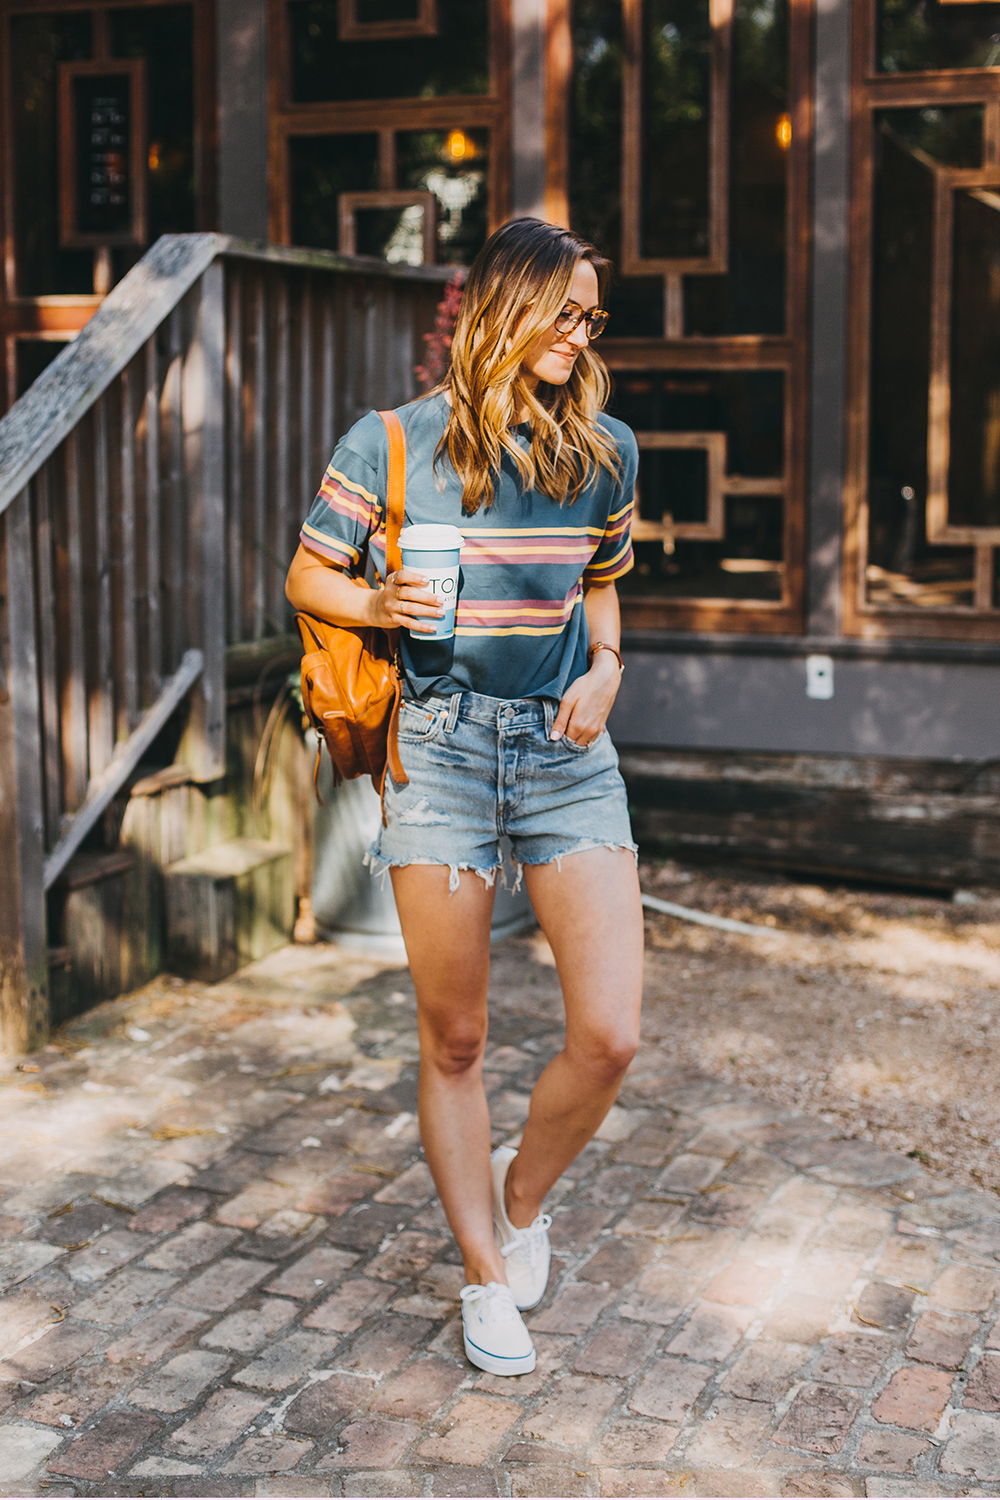 livvyland-blog-olivia-watson-austin-texas-fashion-style-urban-outfitters-striped-vintage-tee-levis-denim-wedgie-shorts-madewell-mini-leather-backpack-8